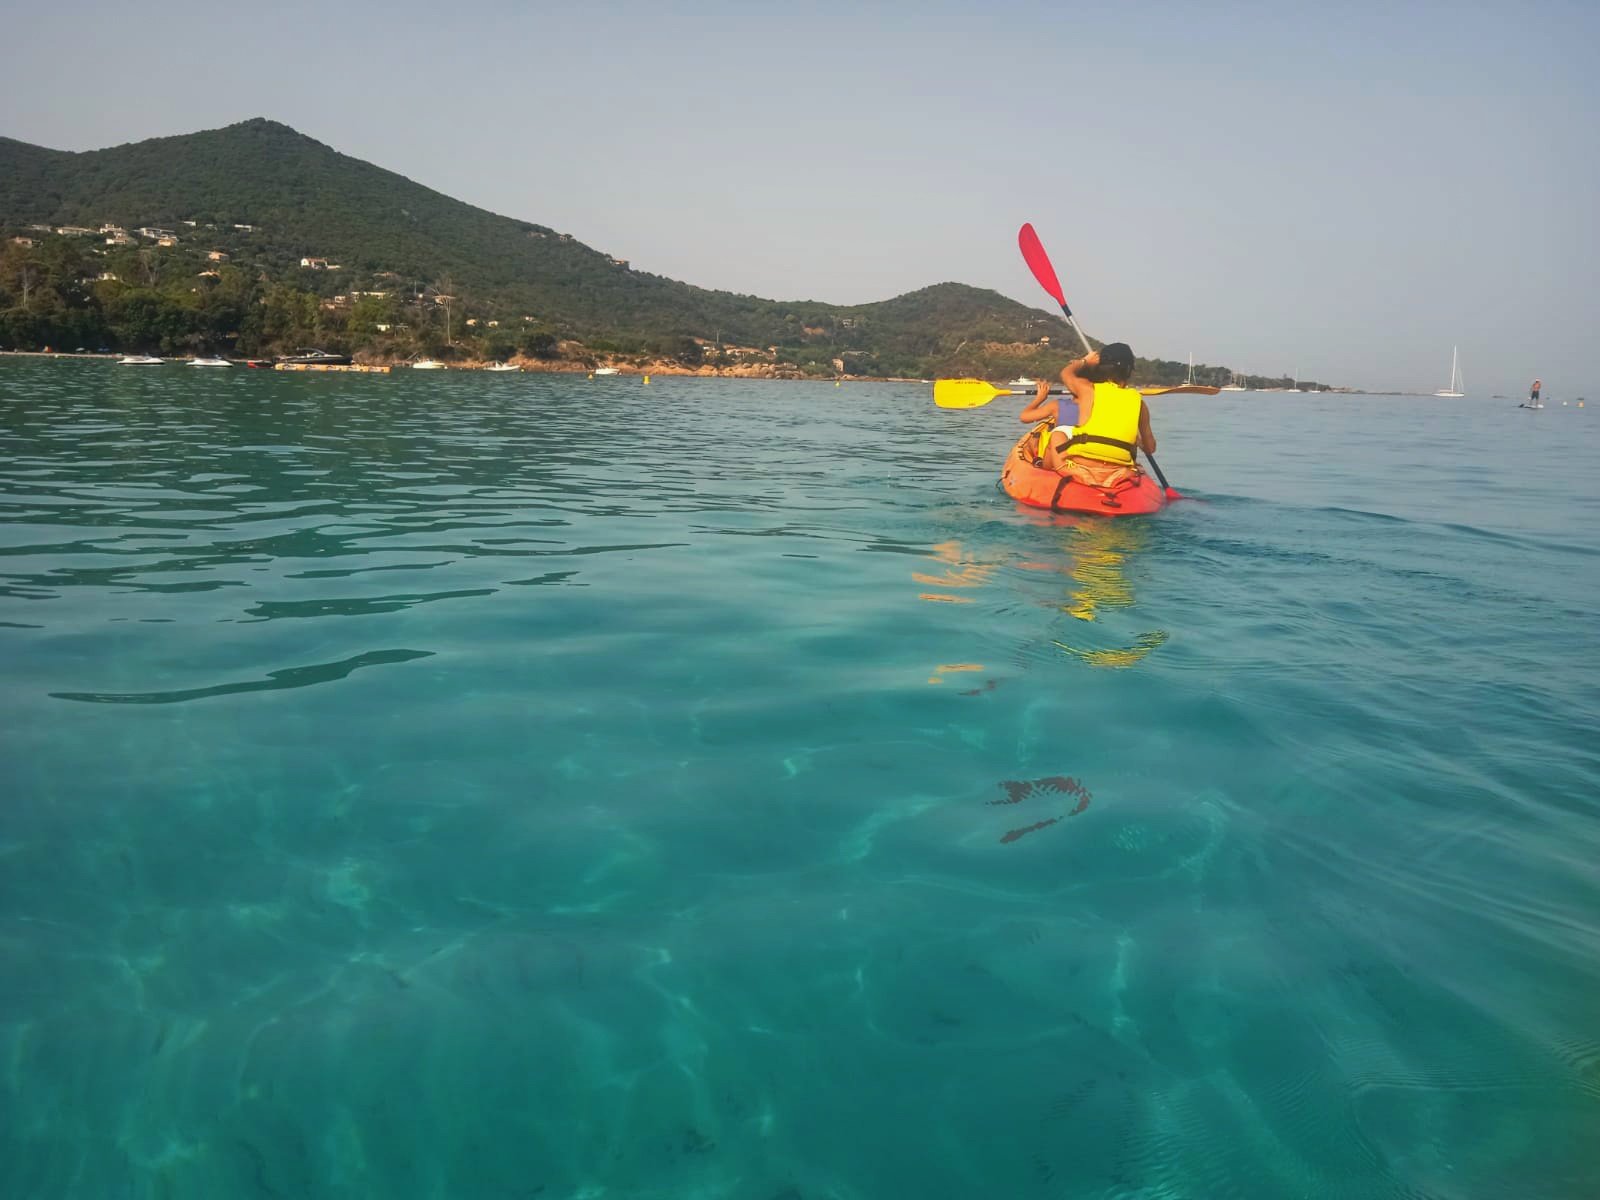 Two people on a two-person kayak on the Mare e Sole beach